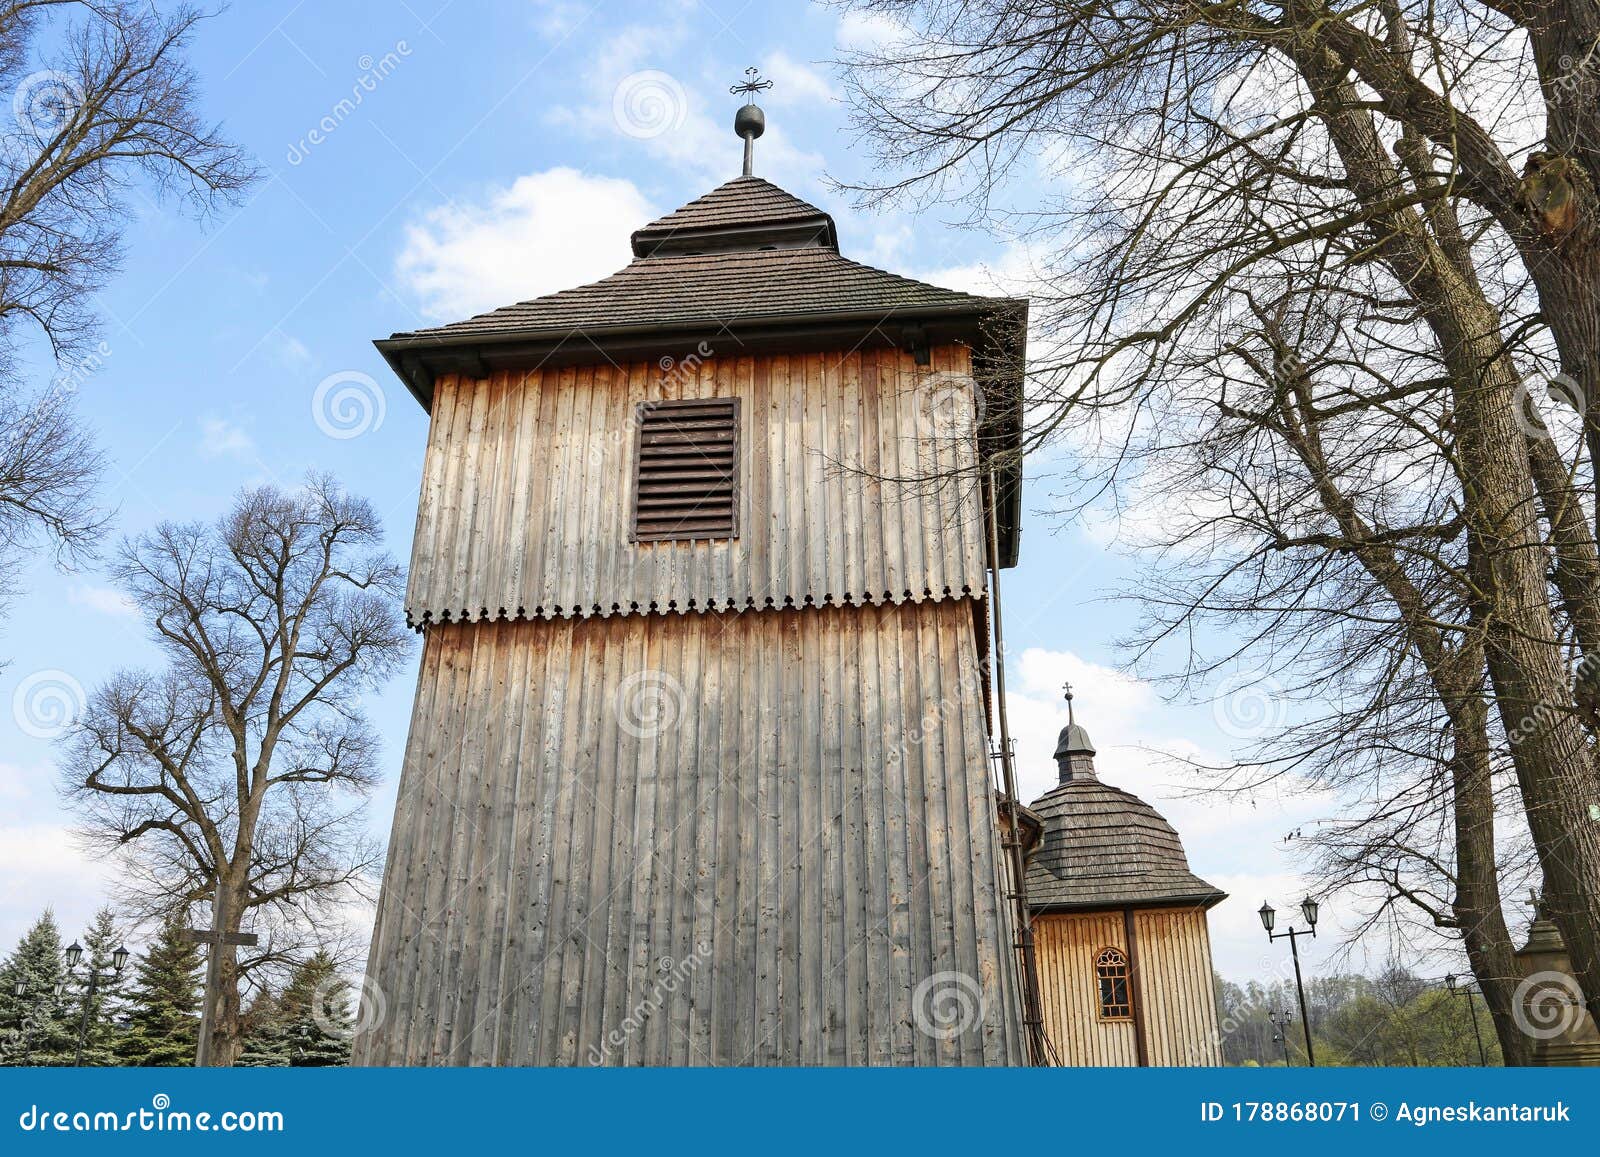 lapanow-poland-april-09-2017-wooden-church-stock-image-image-of